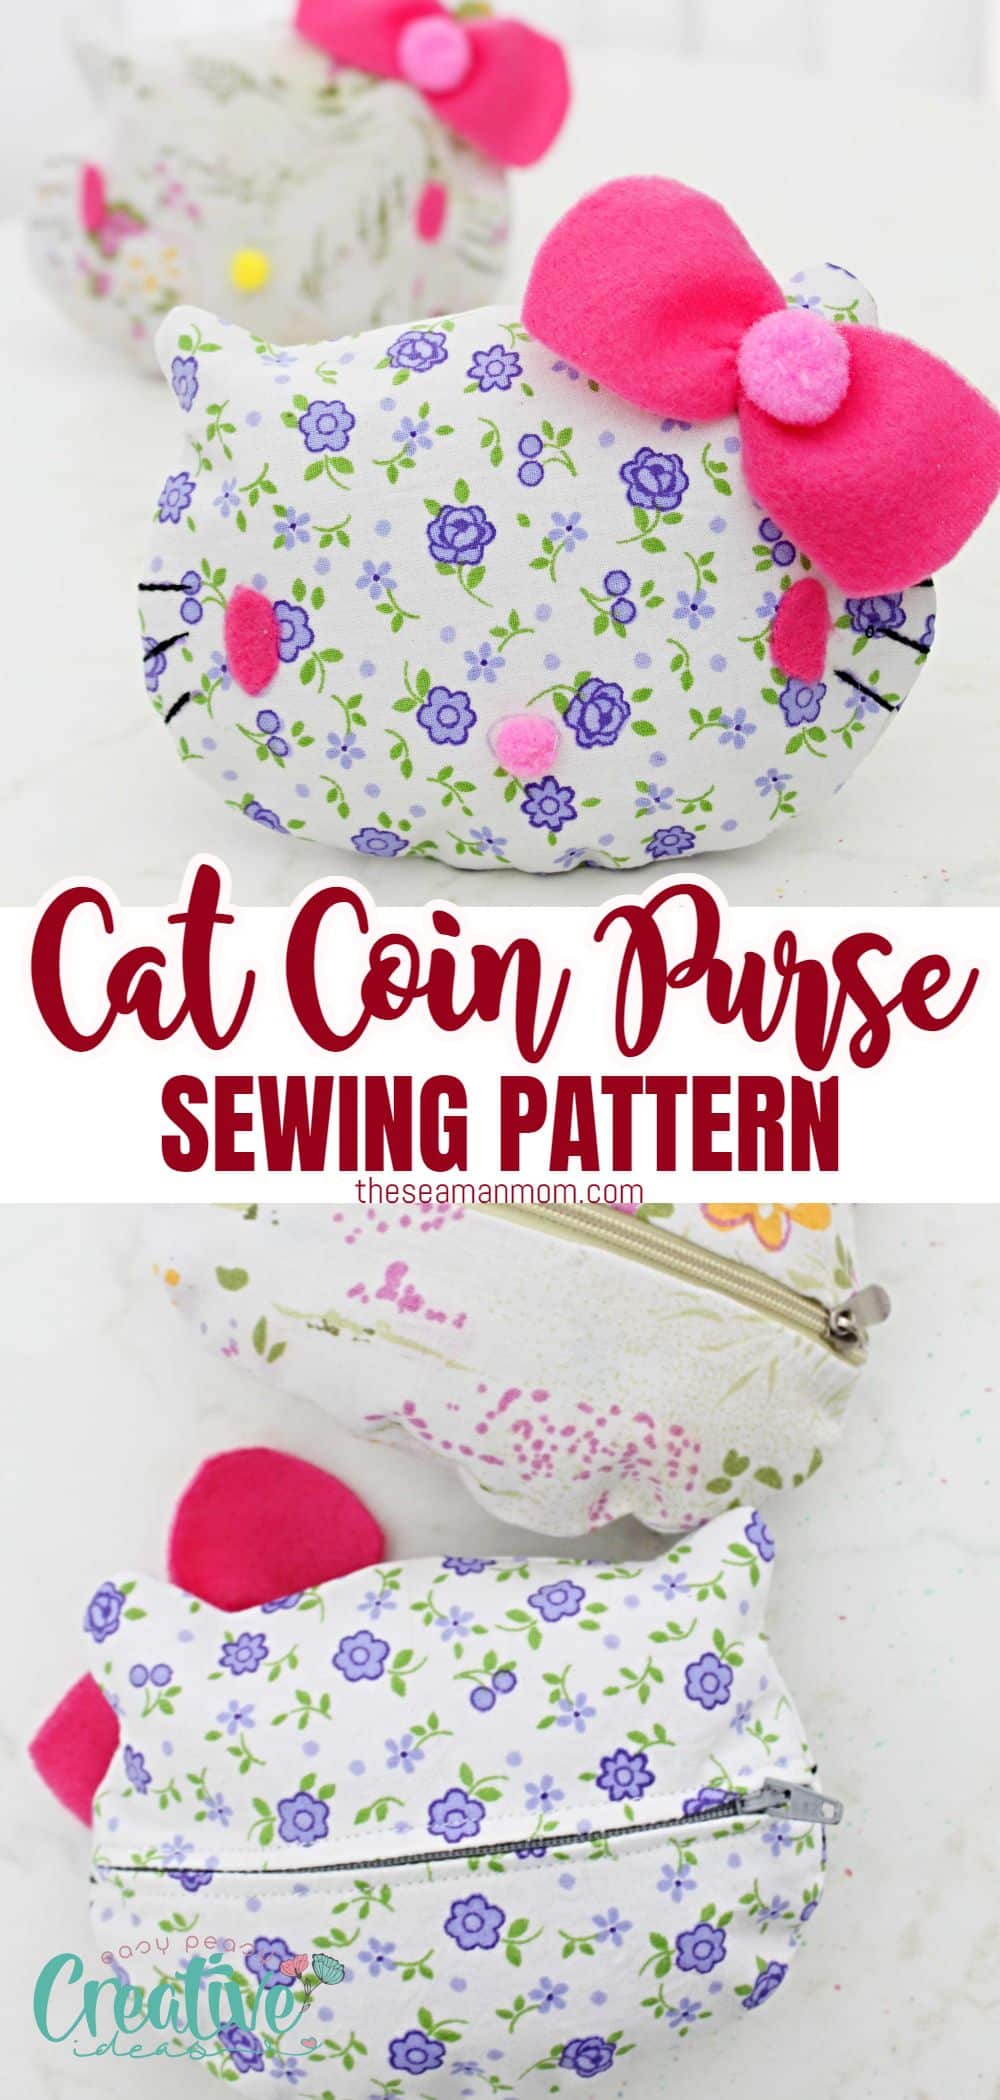 If you're looking for a fun and unique coin purse, look no further than this cute cat coin purse! This practical accessory is perfect for cat lovers and can be easily made with a few simple sewing supplies. Follow my step-by-step instructions to learn how to make your own coin purse, complete with a zipper closure. You'll love using this cute purse to keep your coins and other small items safe!

 via @petroneagu